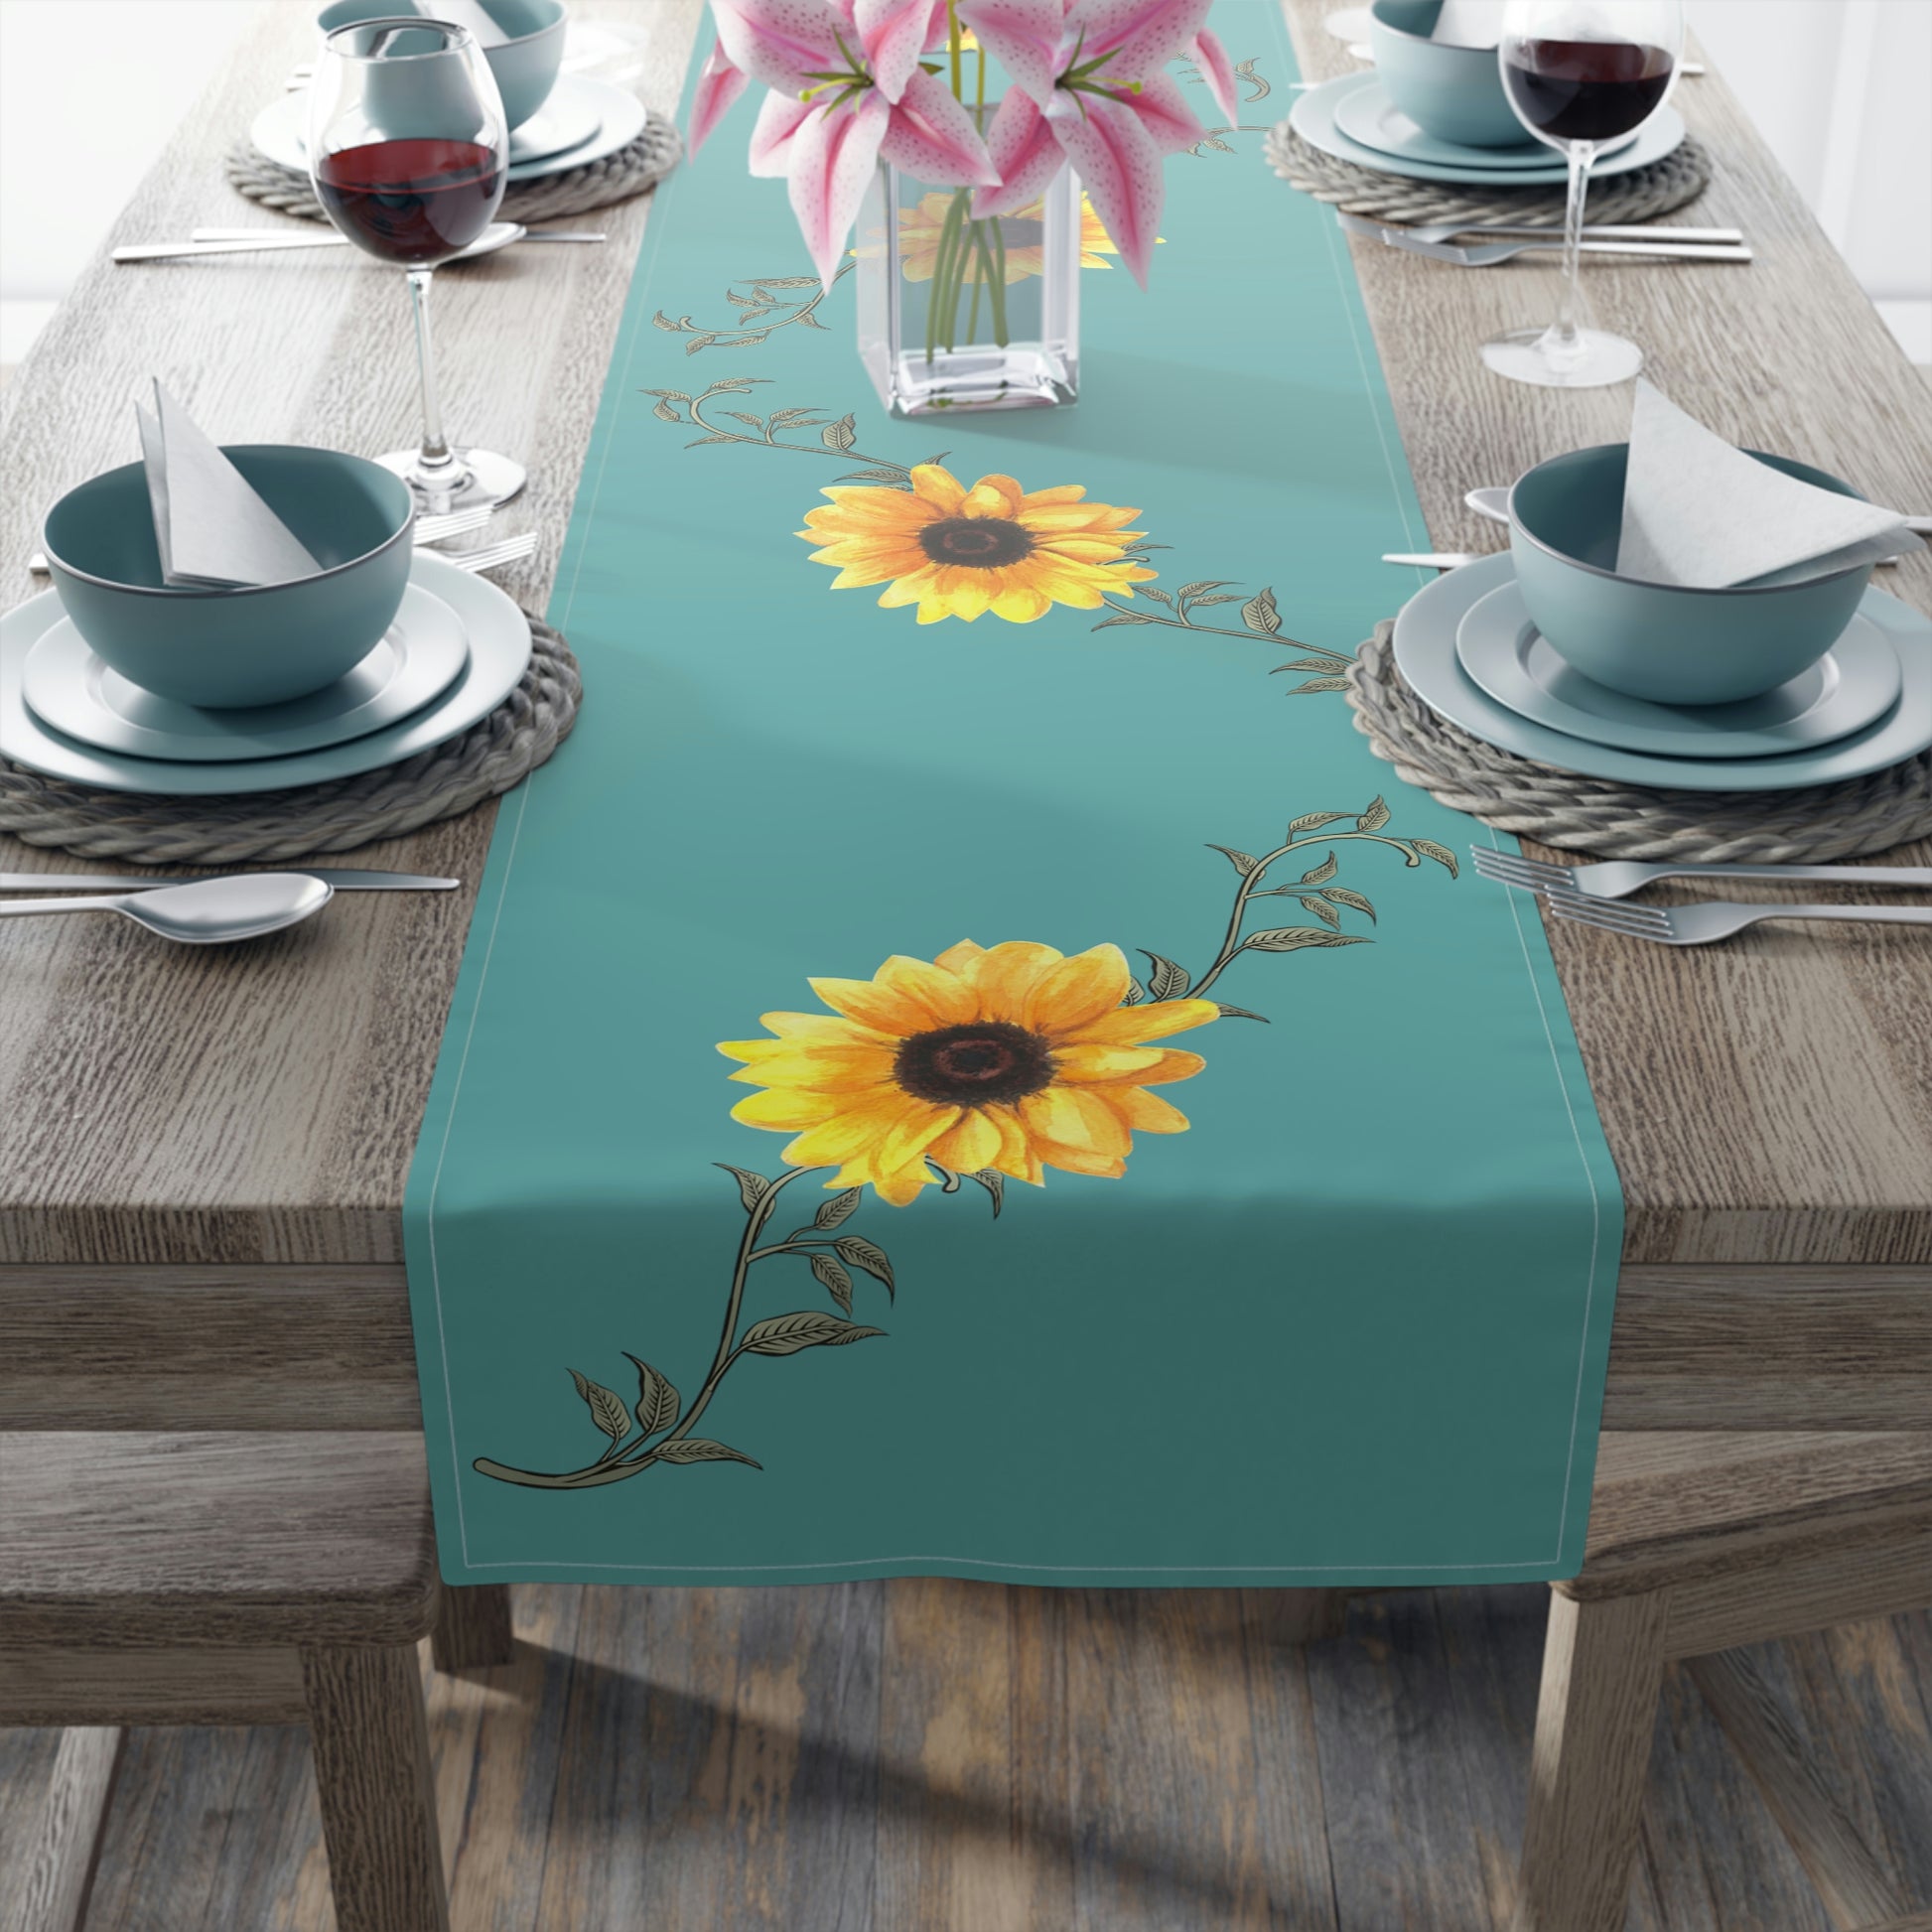 teal table runner with watercolor yellow sunflower print